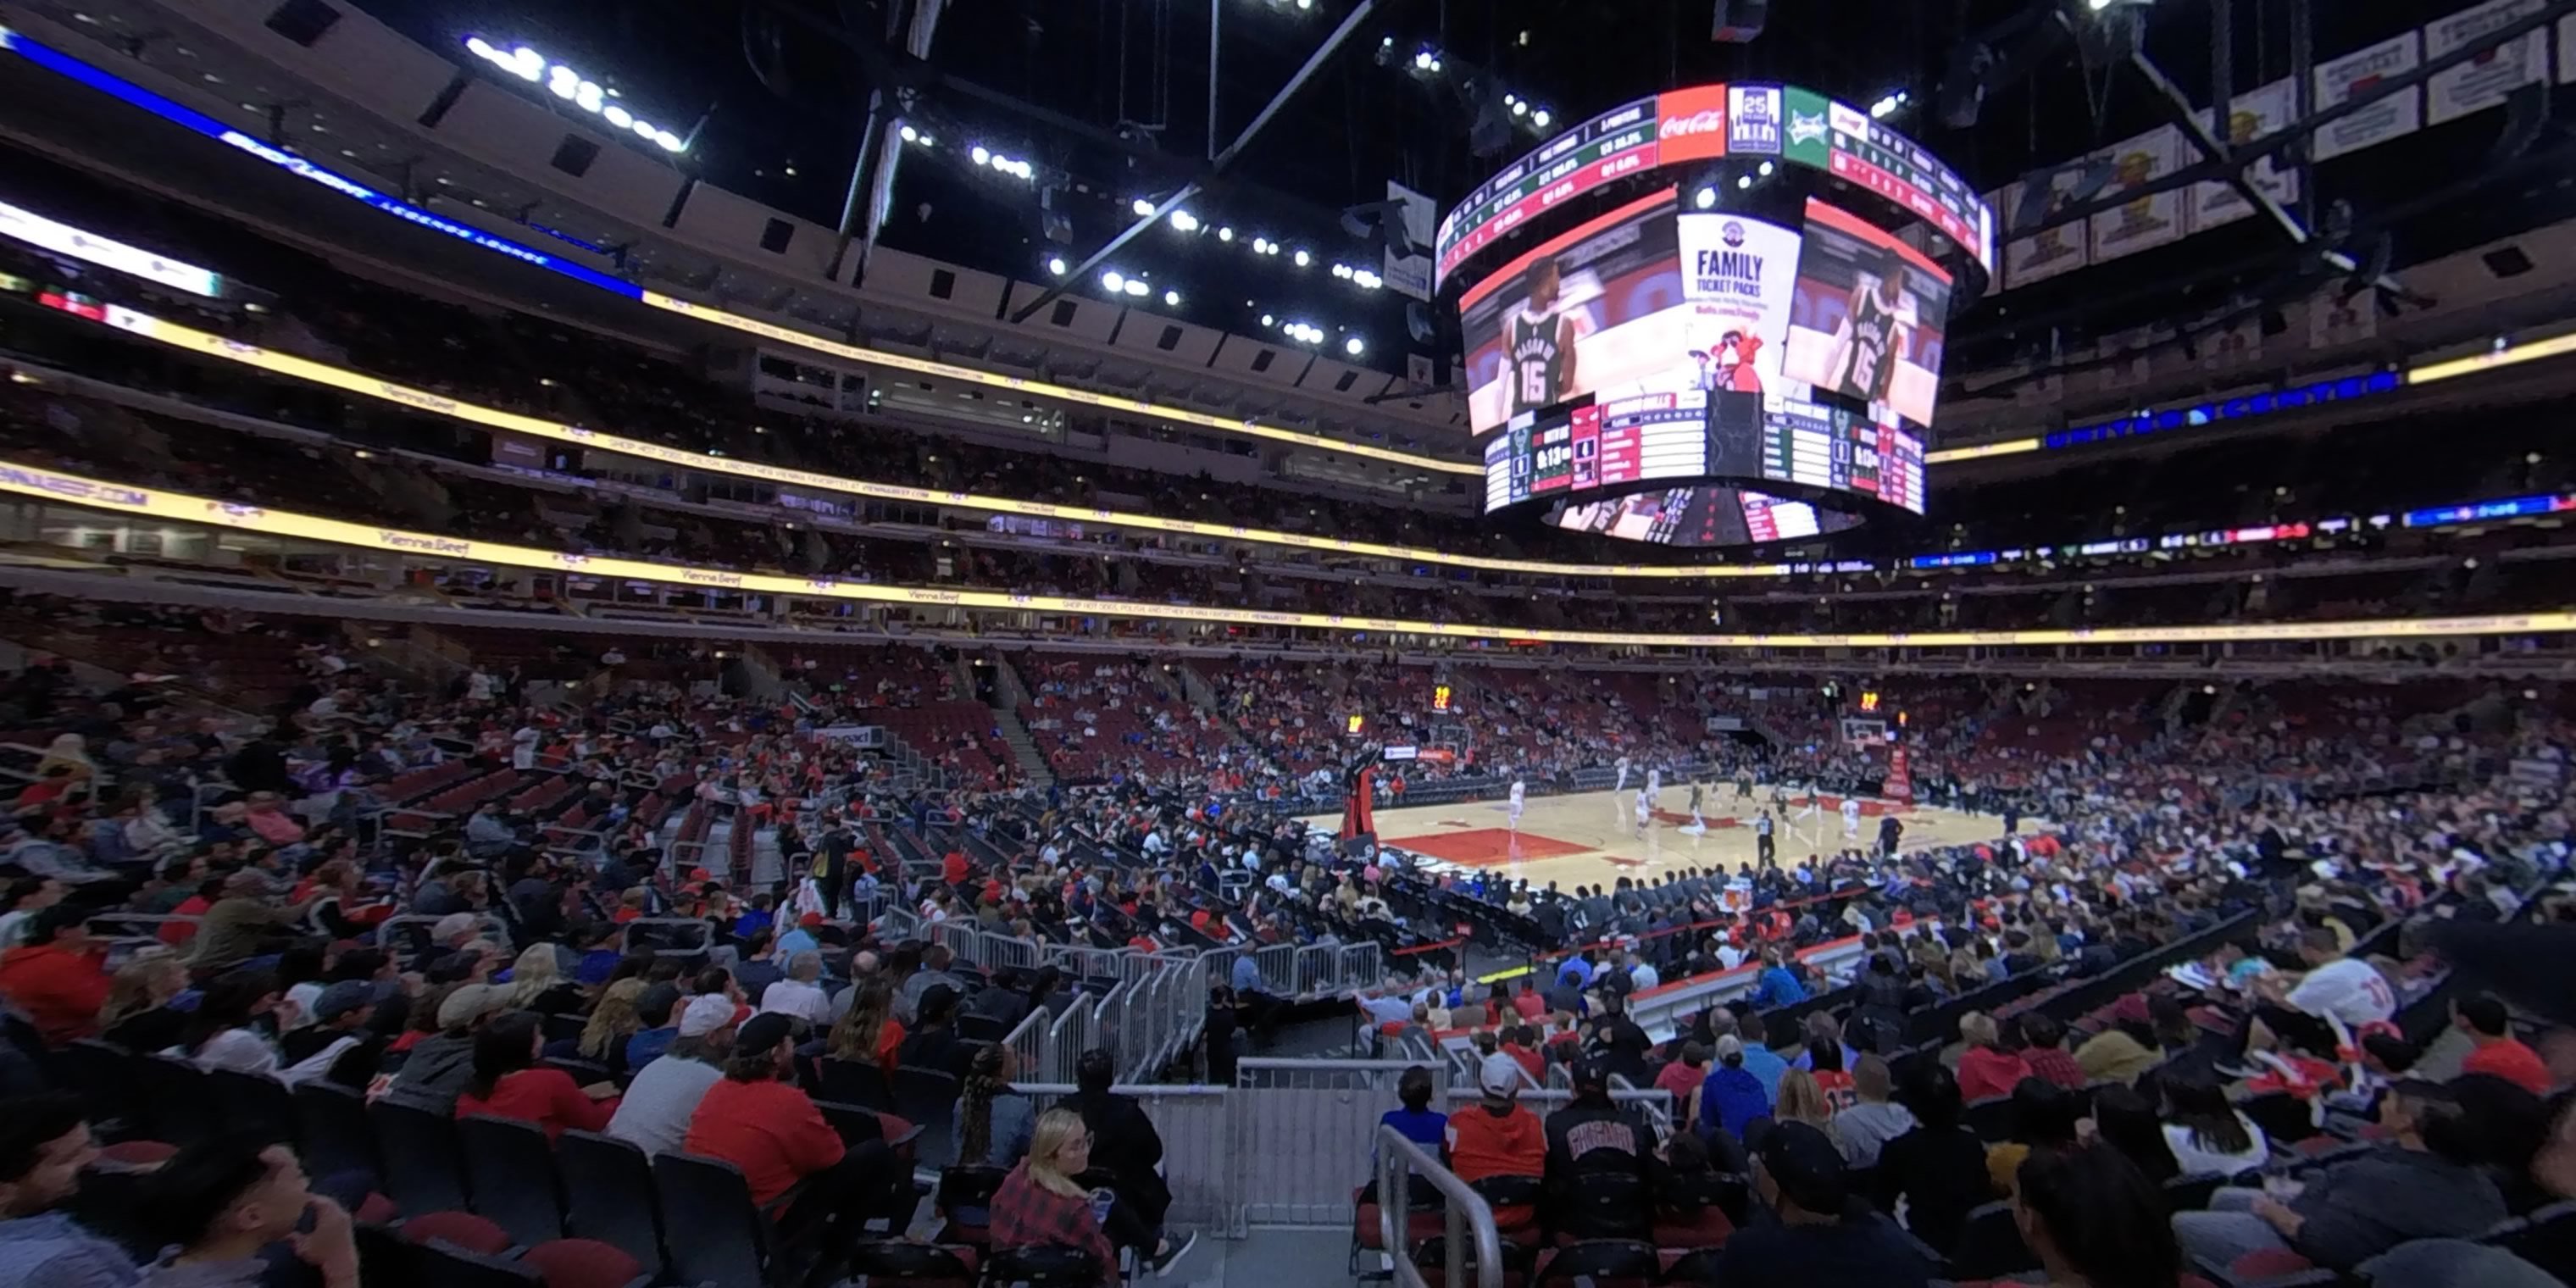 section 103 panoramic seat view  for basketball - united center